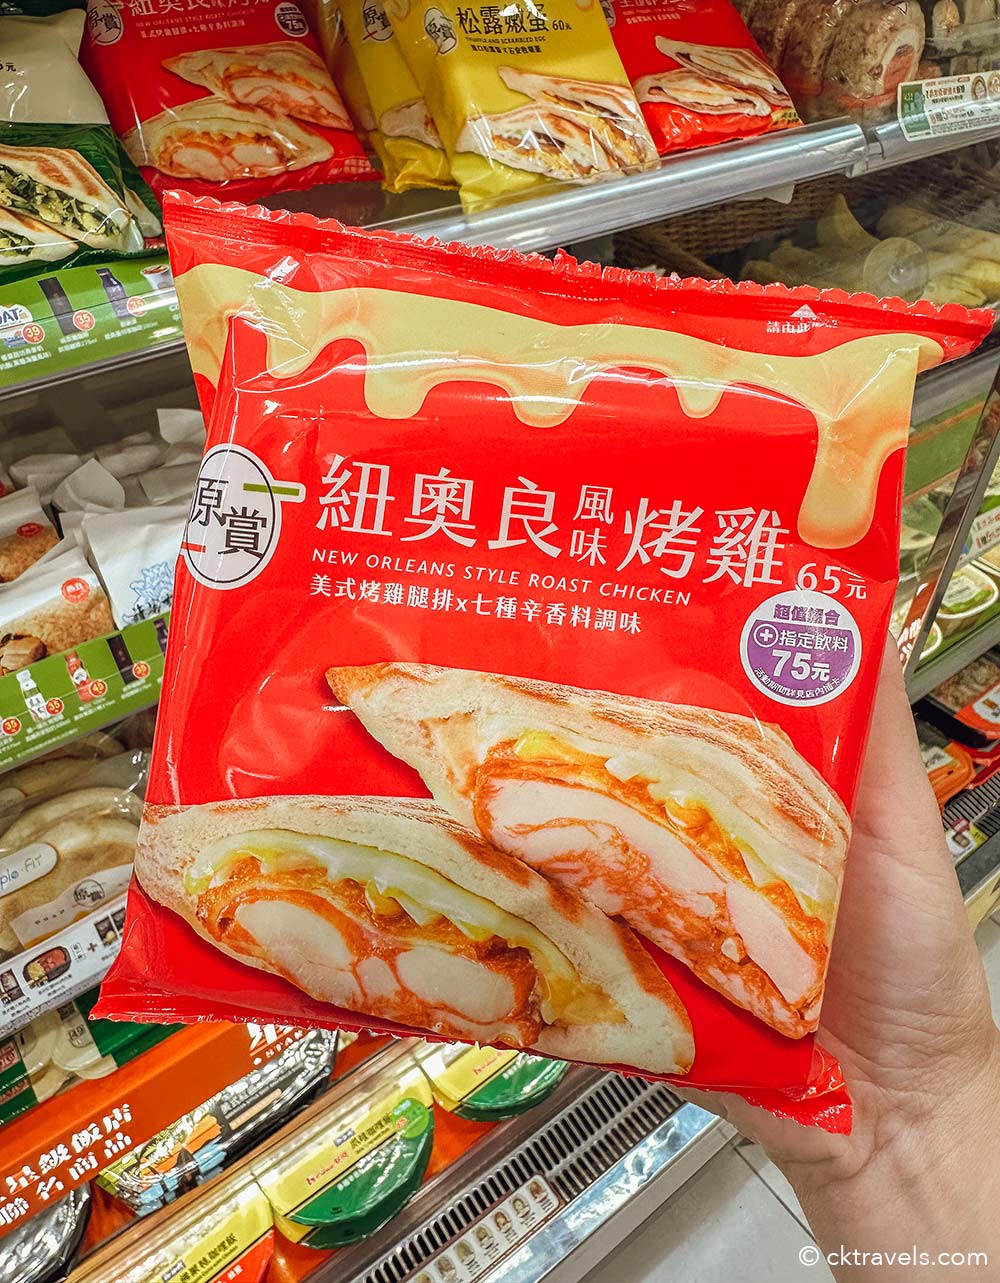 New Orleans style roast chicken toasted sandwich at Taiwan 7-Eleven